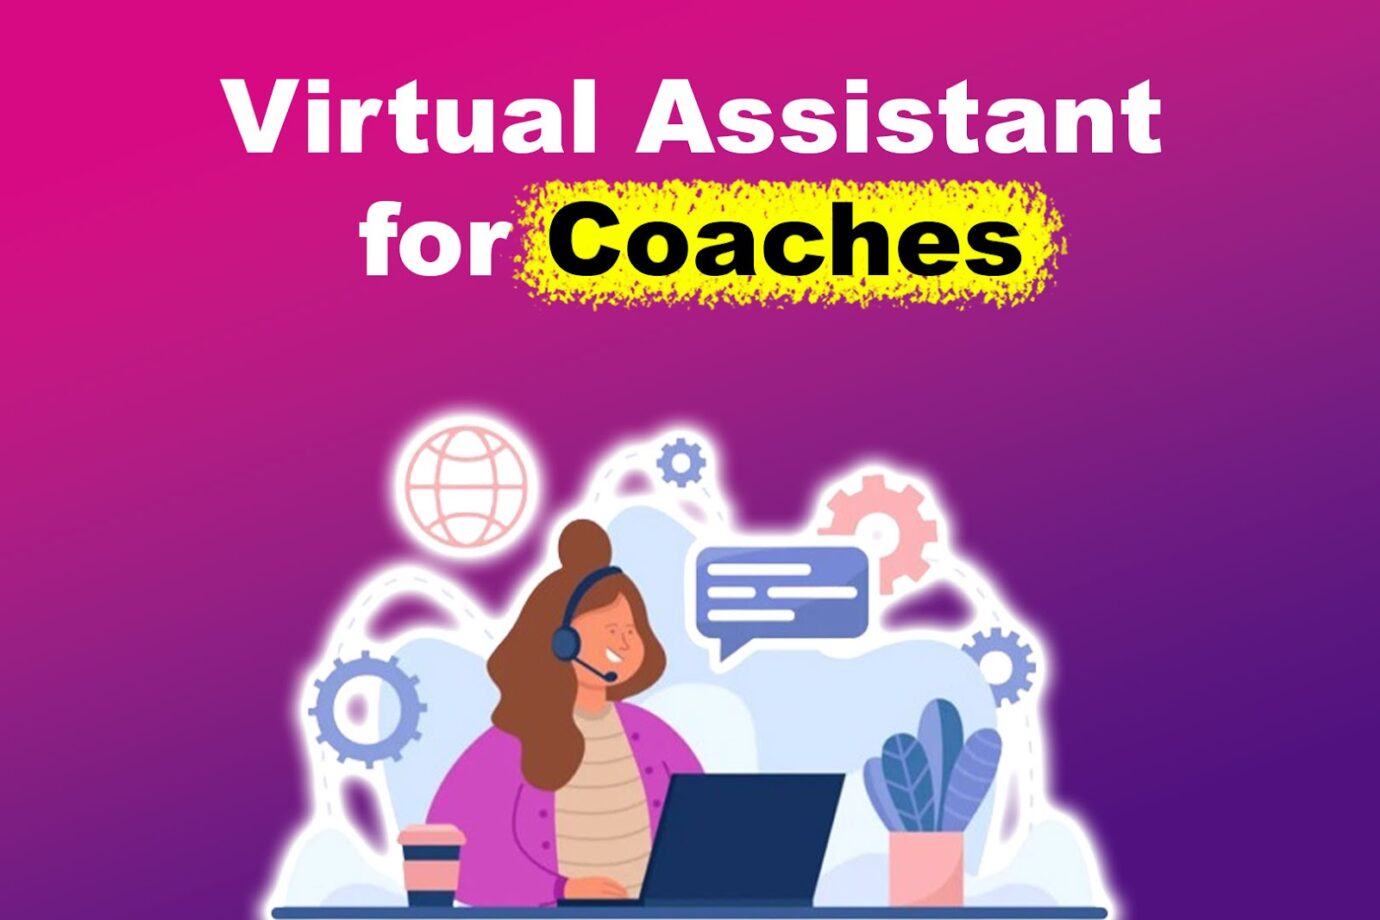 Virtual Assistant for Coaches